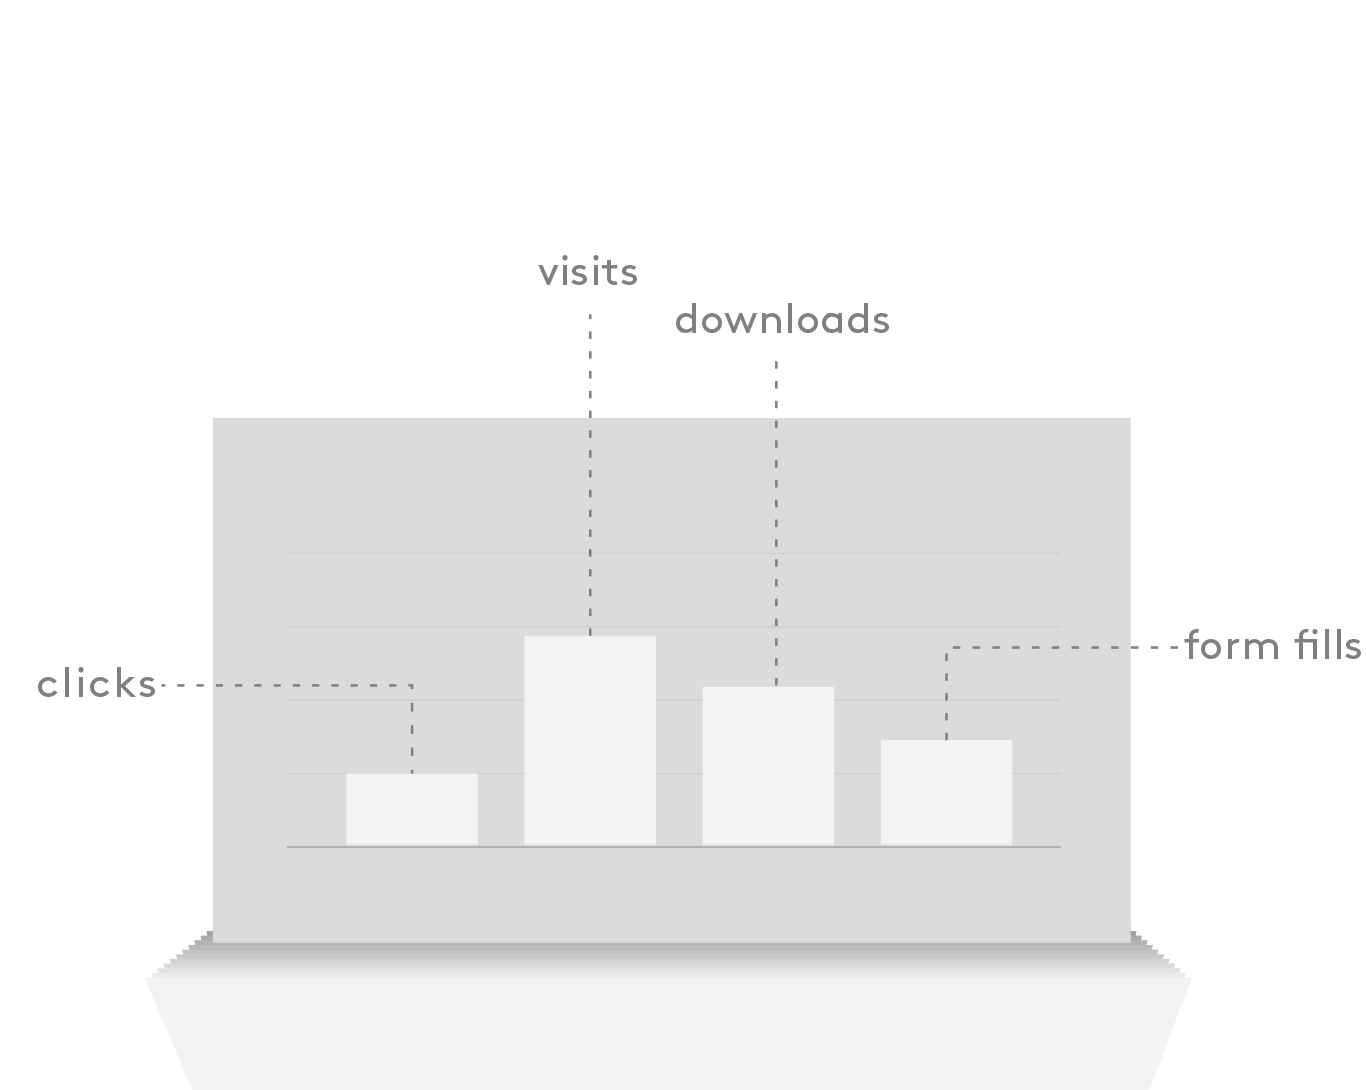 A grey, monochrome table showing bars representing "clicks, visits, downloads and form fills"